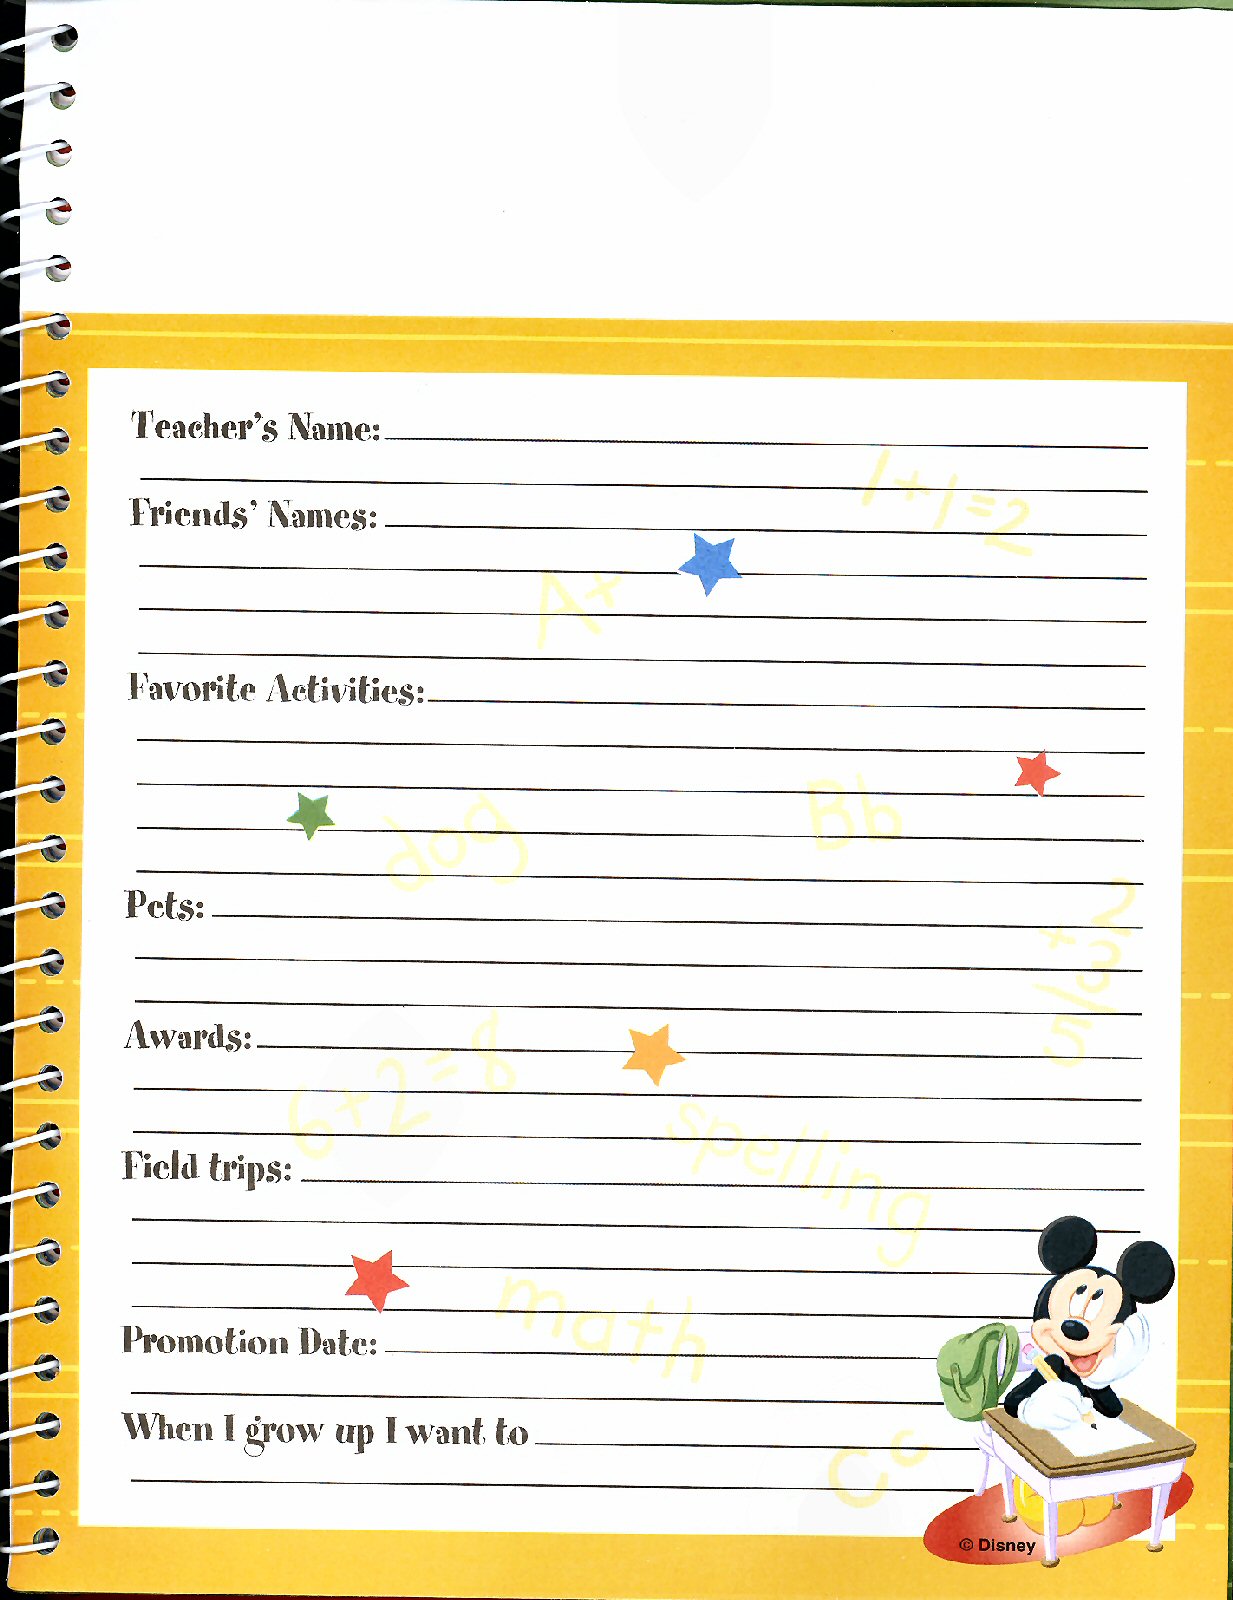 Mickey Mouse School Days Memories Book - Click Image to Close